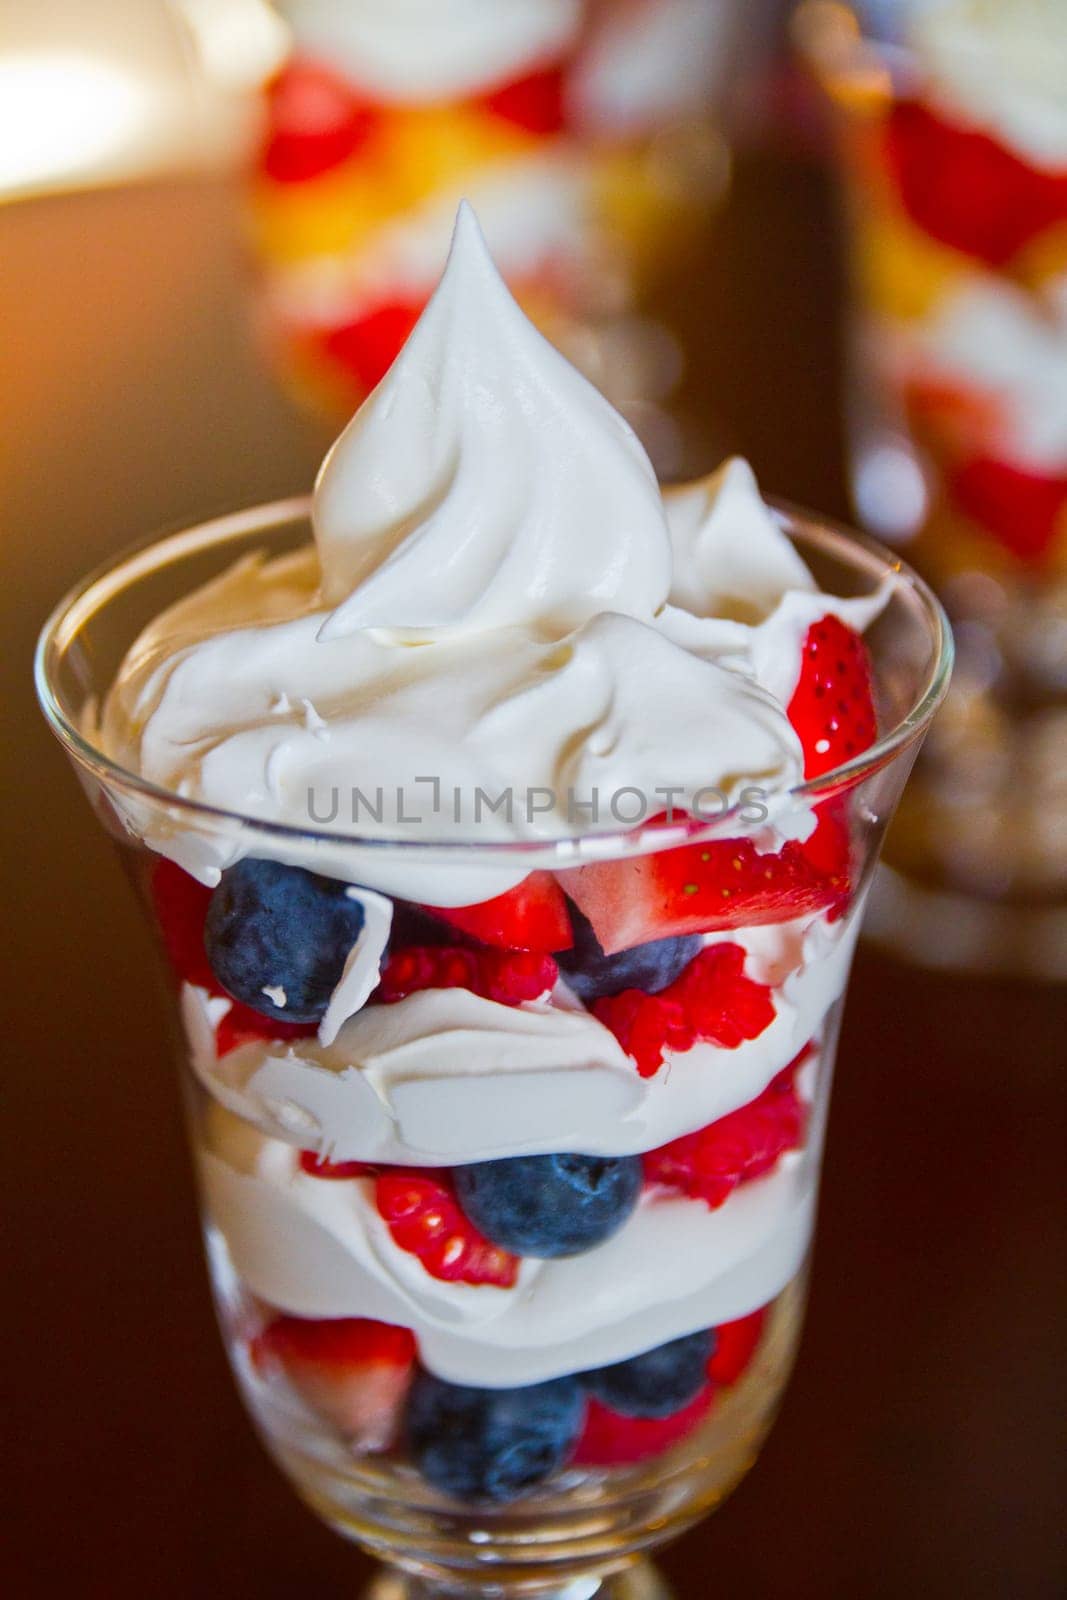 Indulge in a luscious fruit parfait with layers of fresh strawberries, blueberries, and whipped cream. A delightful treat for any occasion.